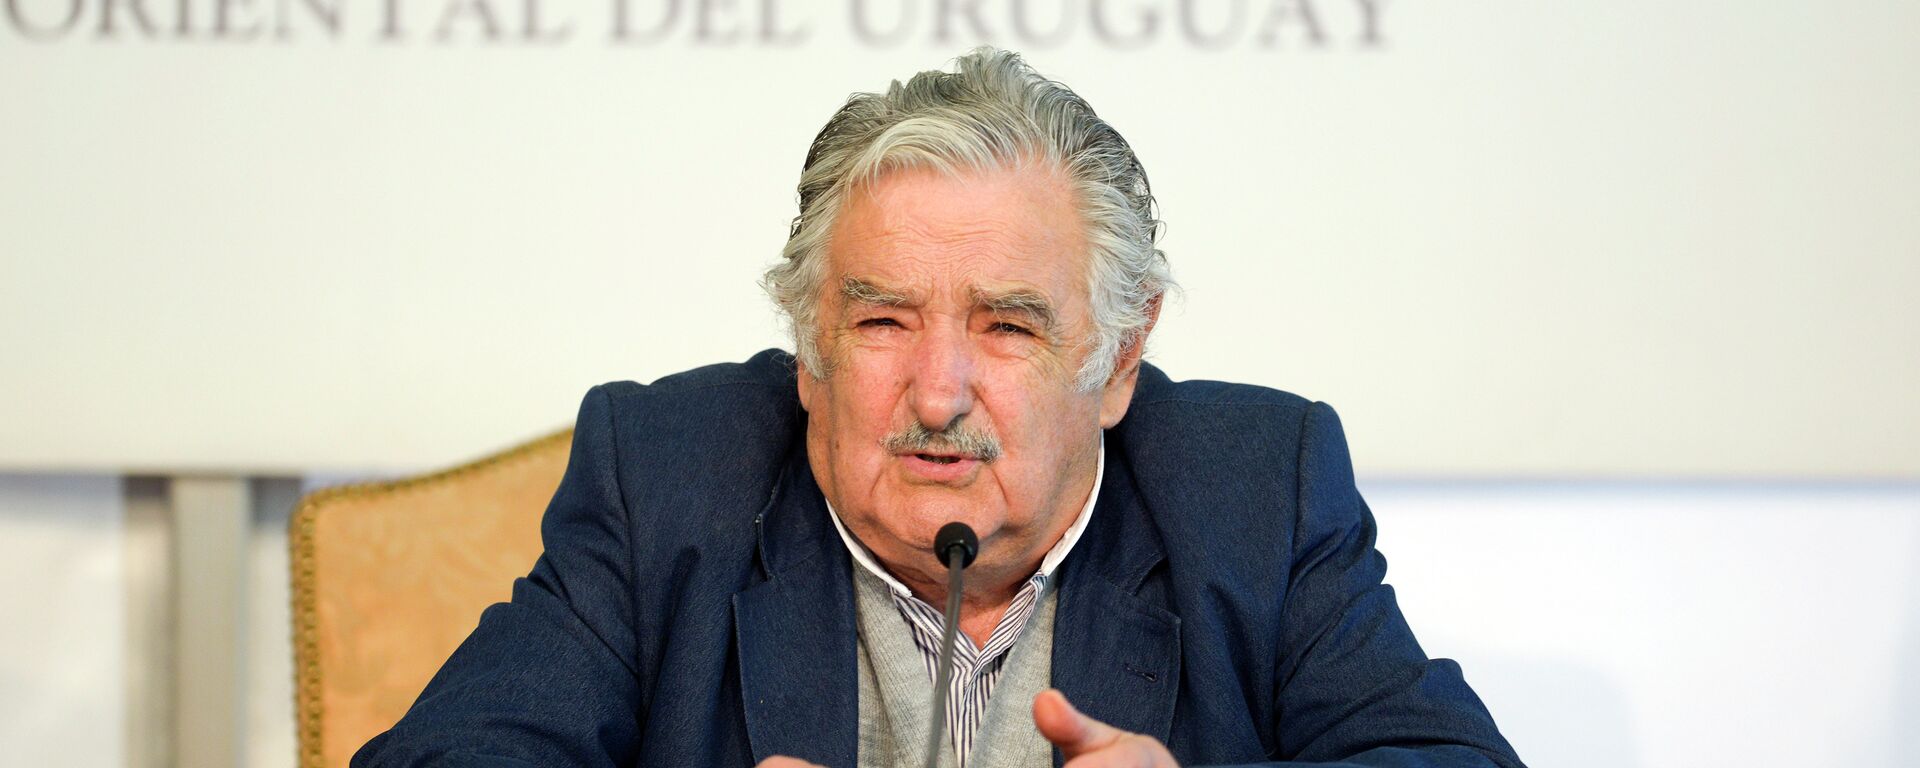 Uruguay's President Jose Mujica speaks during a joint news conference with Chile's President Michelle Bachelet - Sputnik Mundo, 1920, 25.05.2021